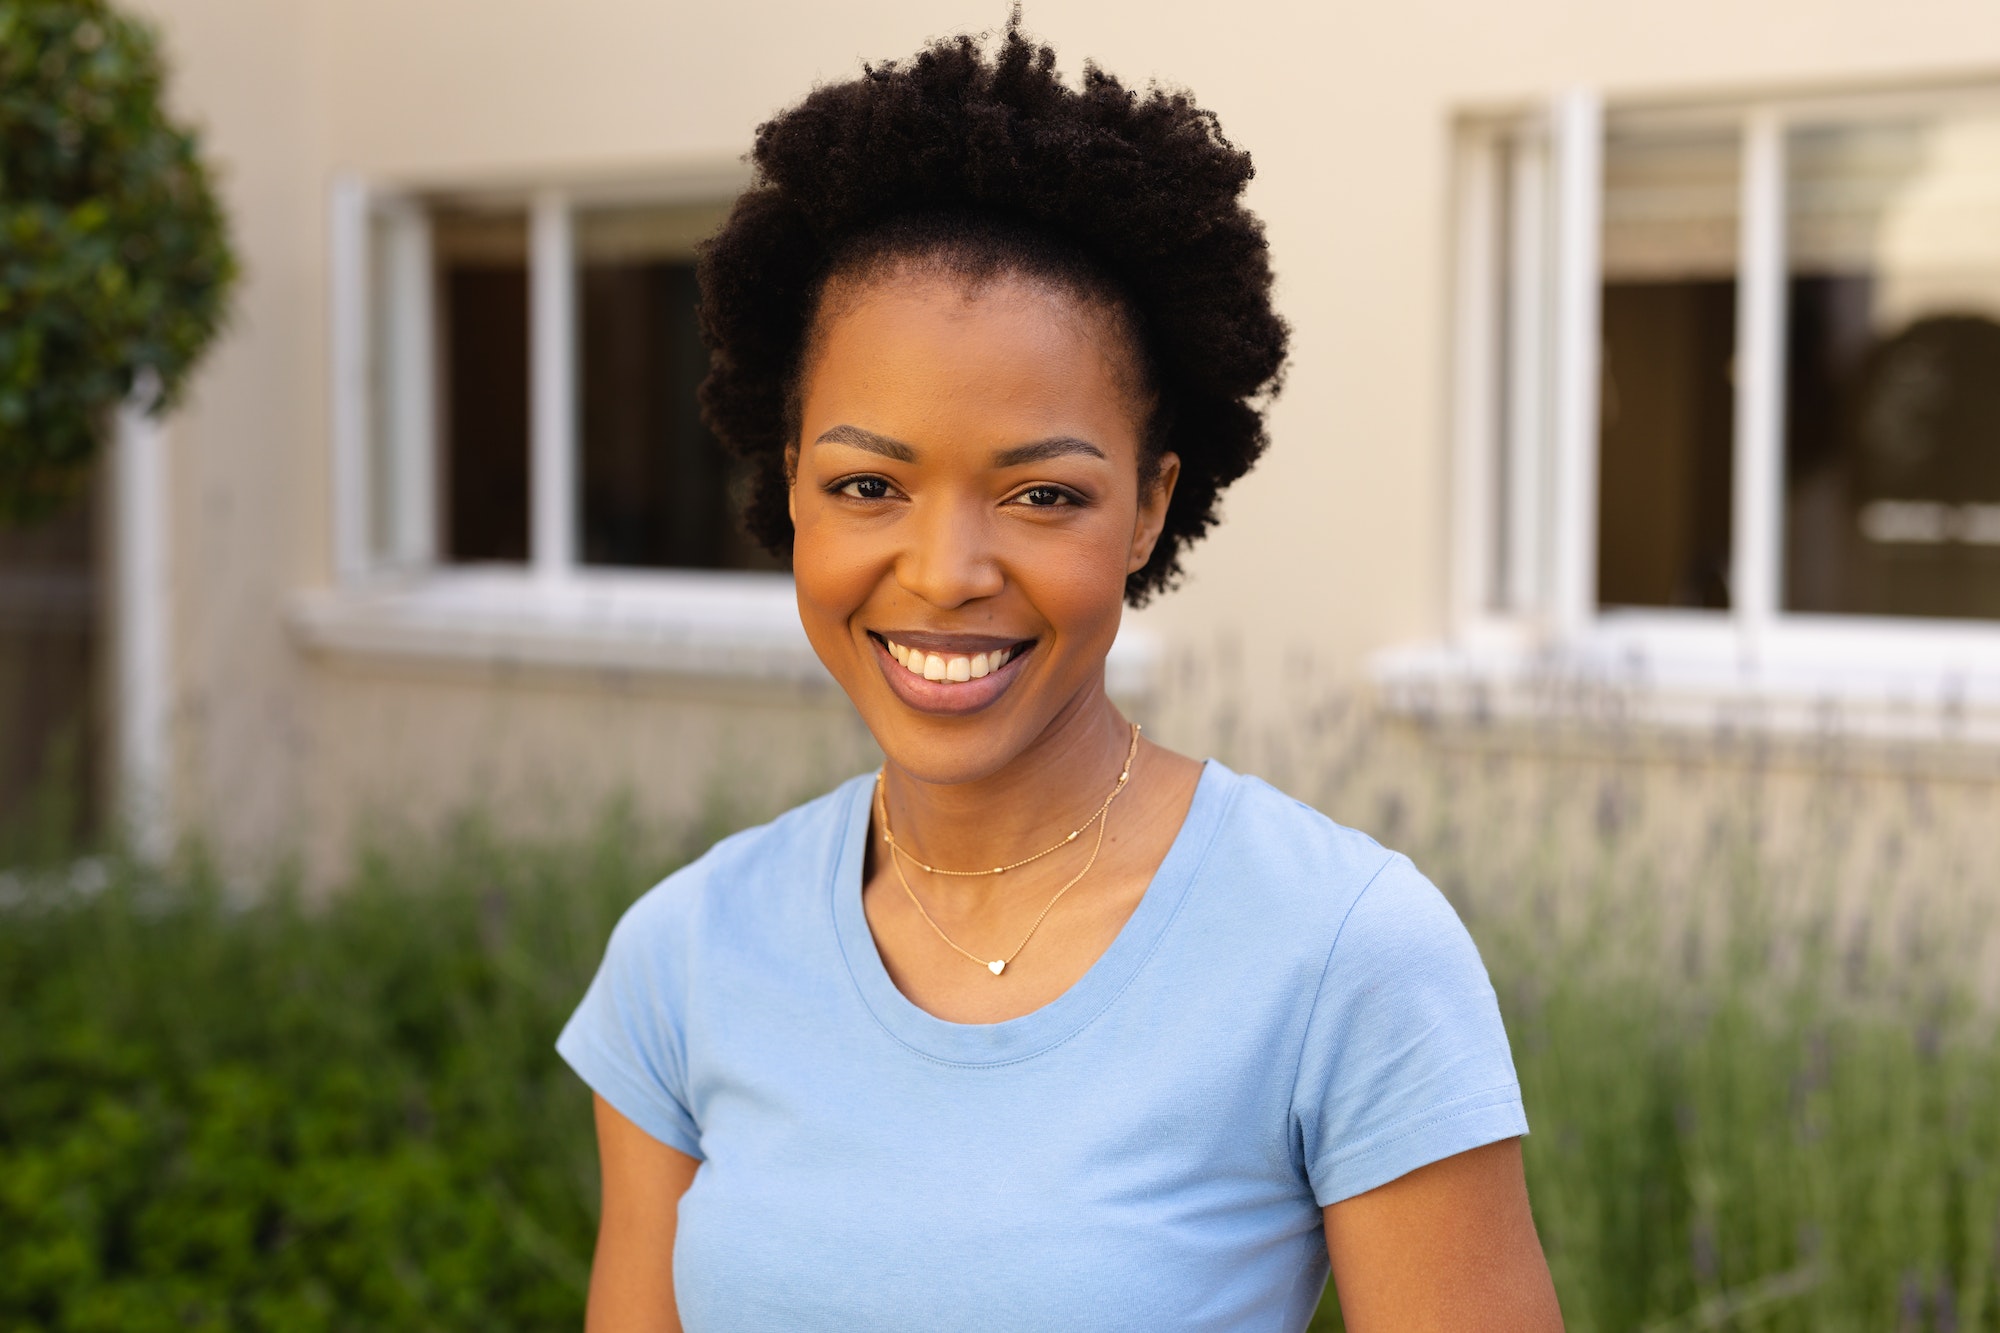 close-up-portrait-of-smiling-african-american-young-woman-smiling-while-standing-outdoors.jpg